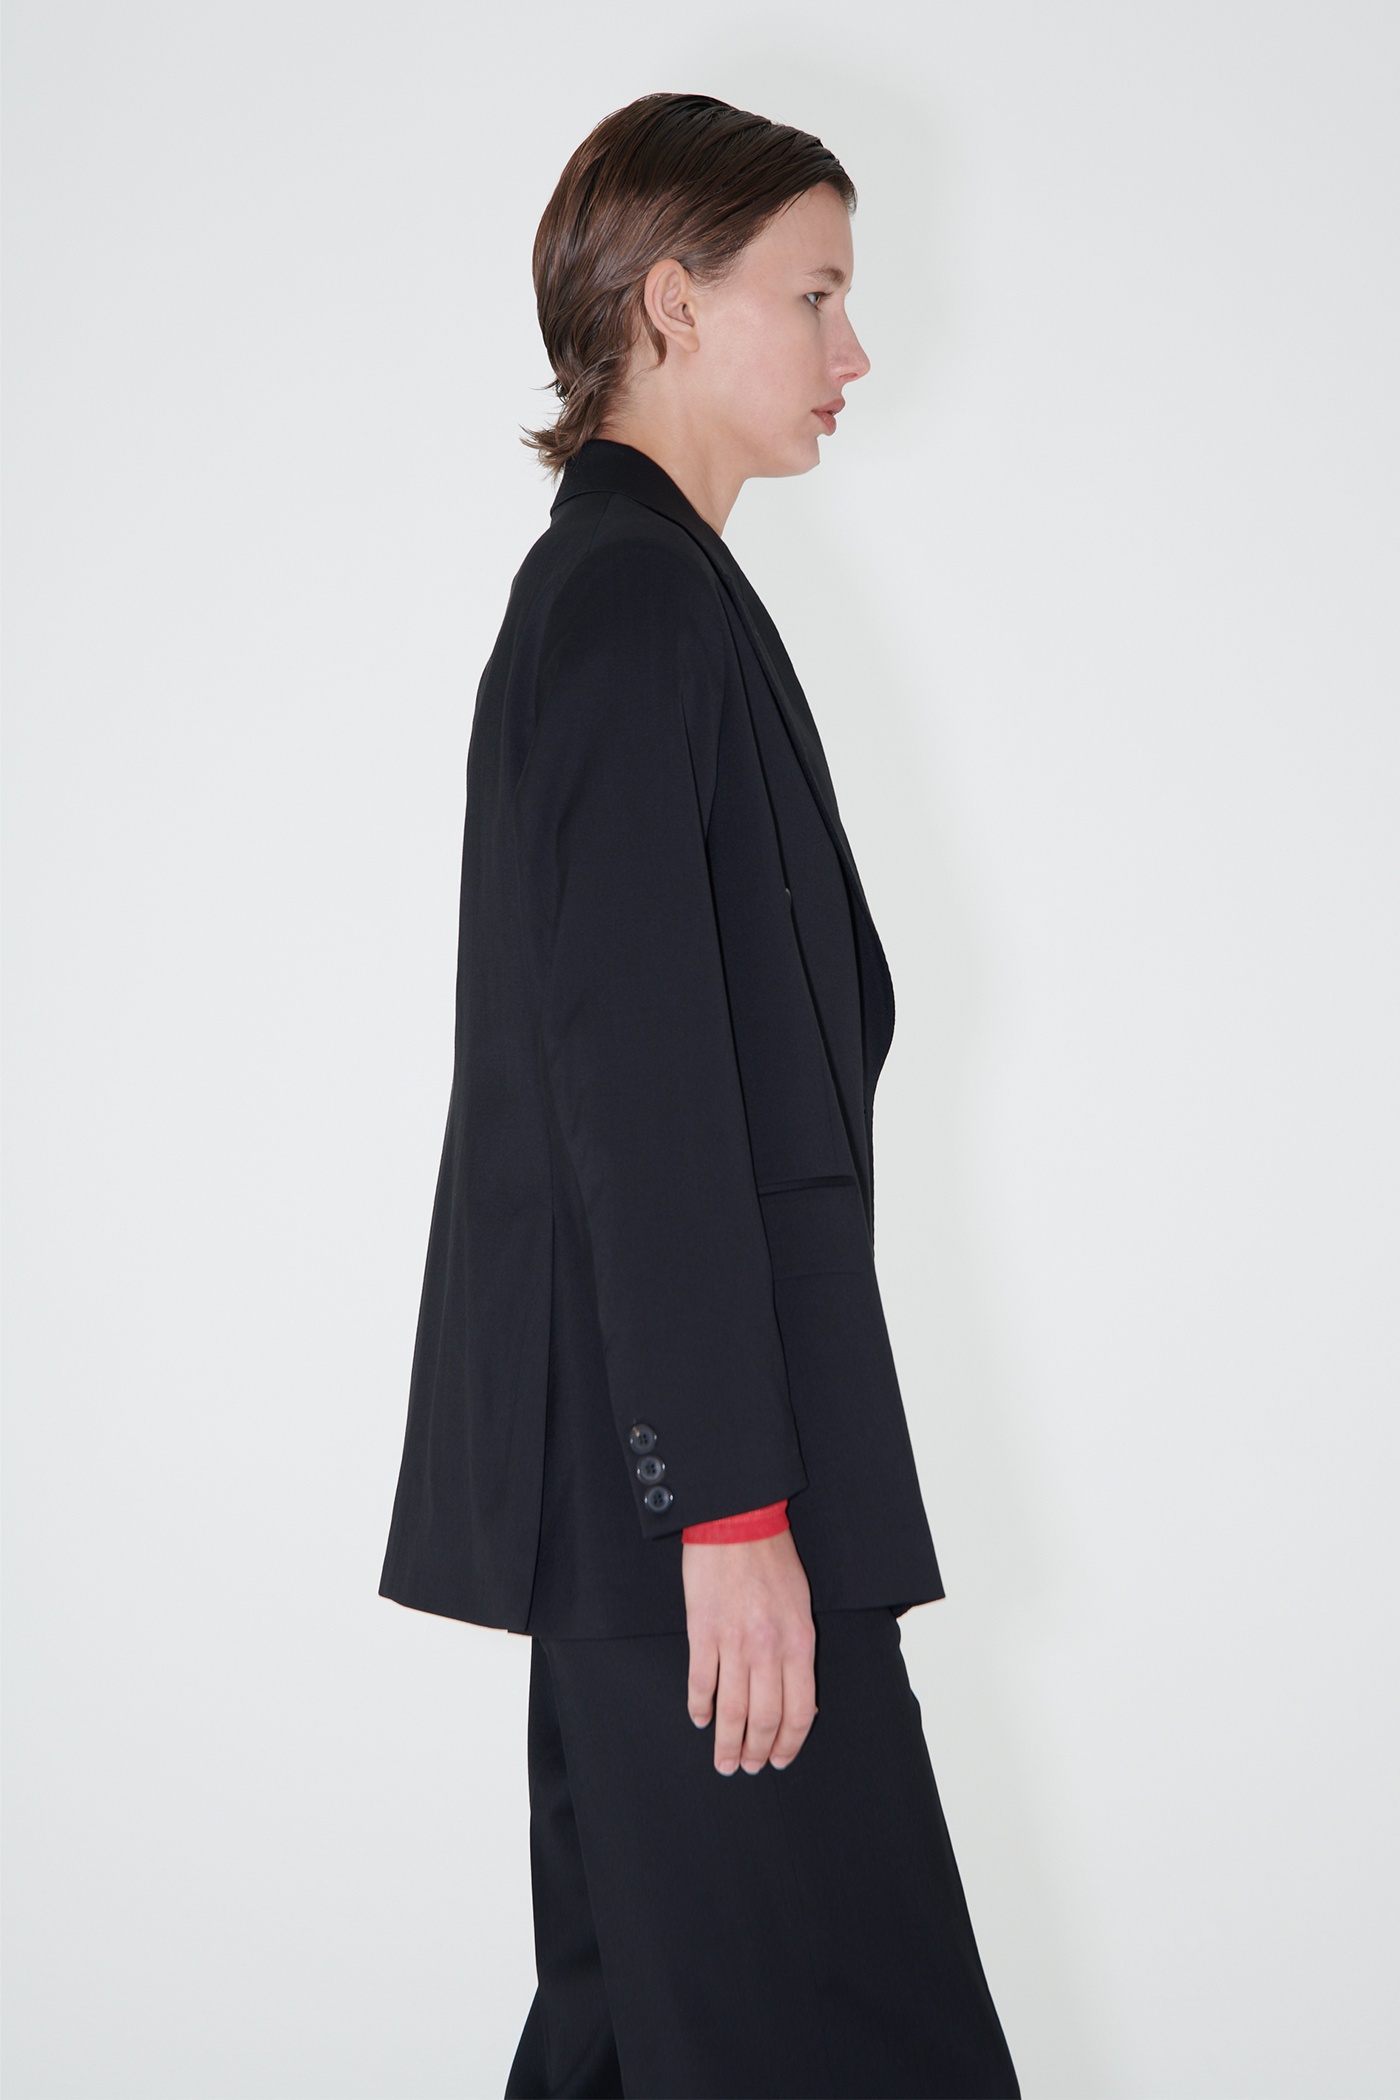 Unconstructed DB Blazer Black Worsted Wool - 3